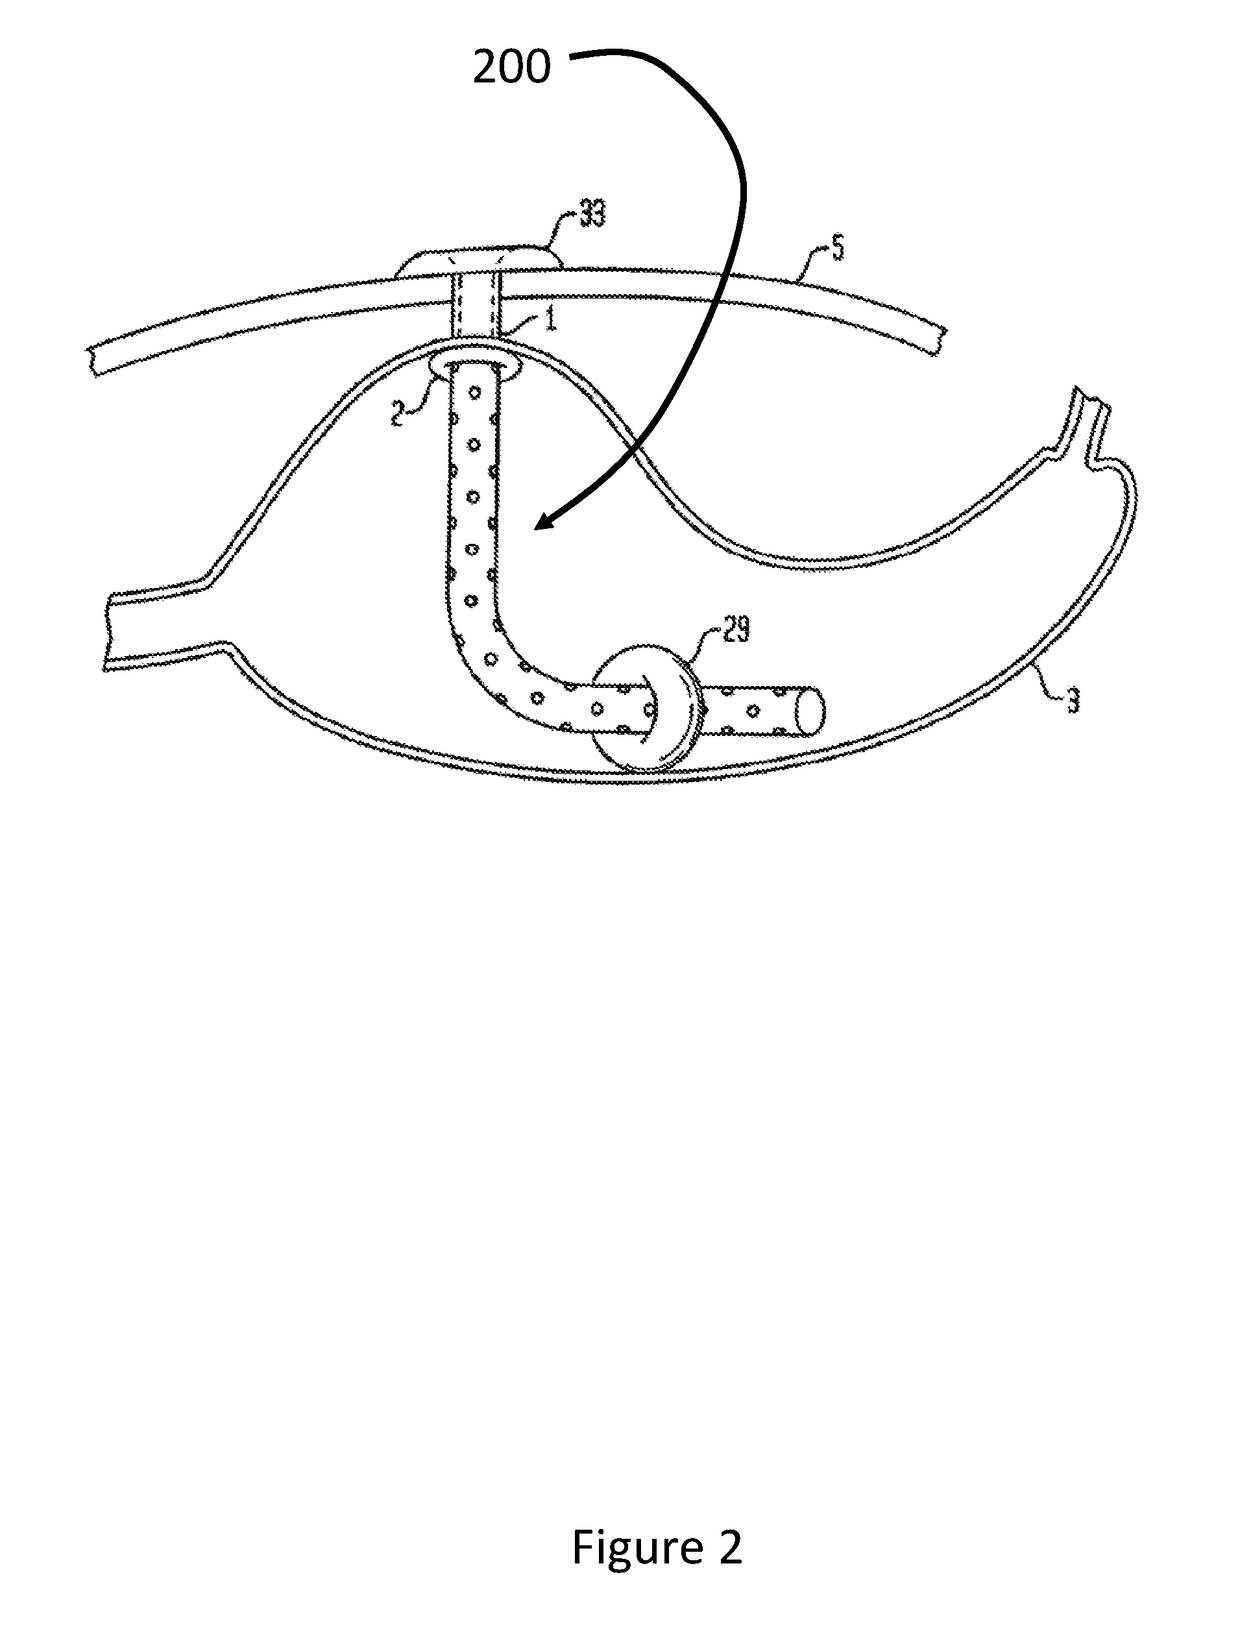 Modified apparatus for food extraction and obesity treatment